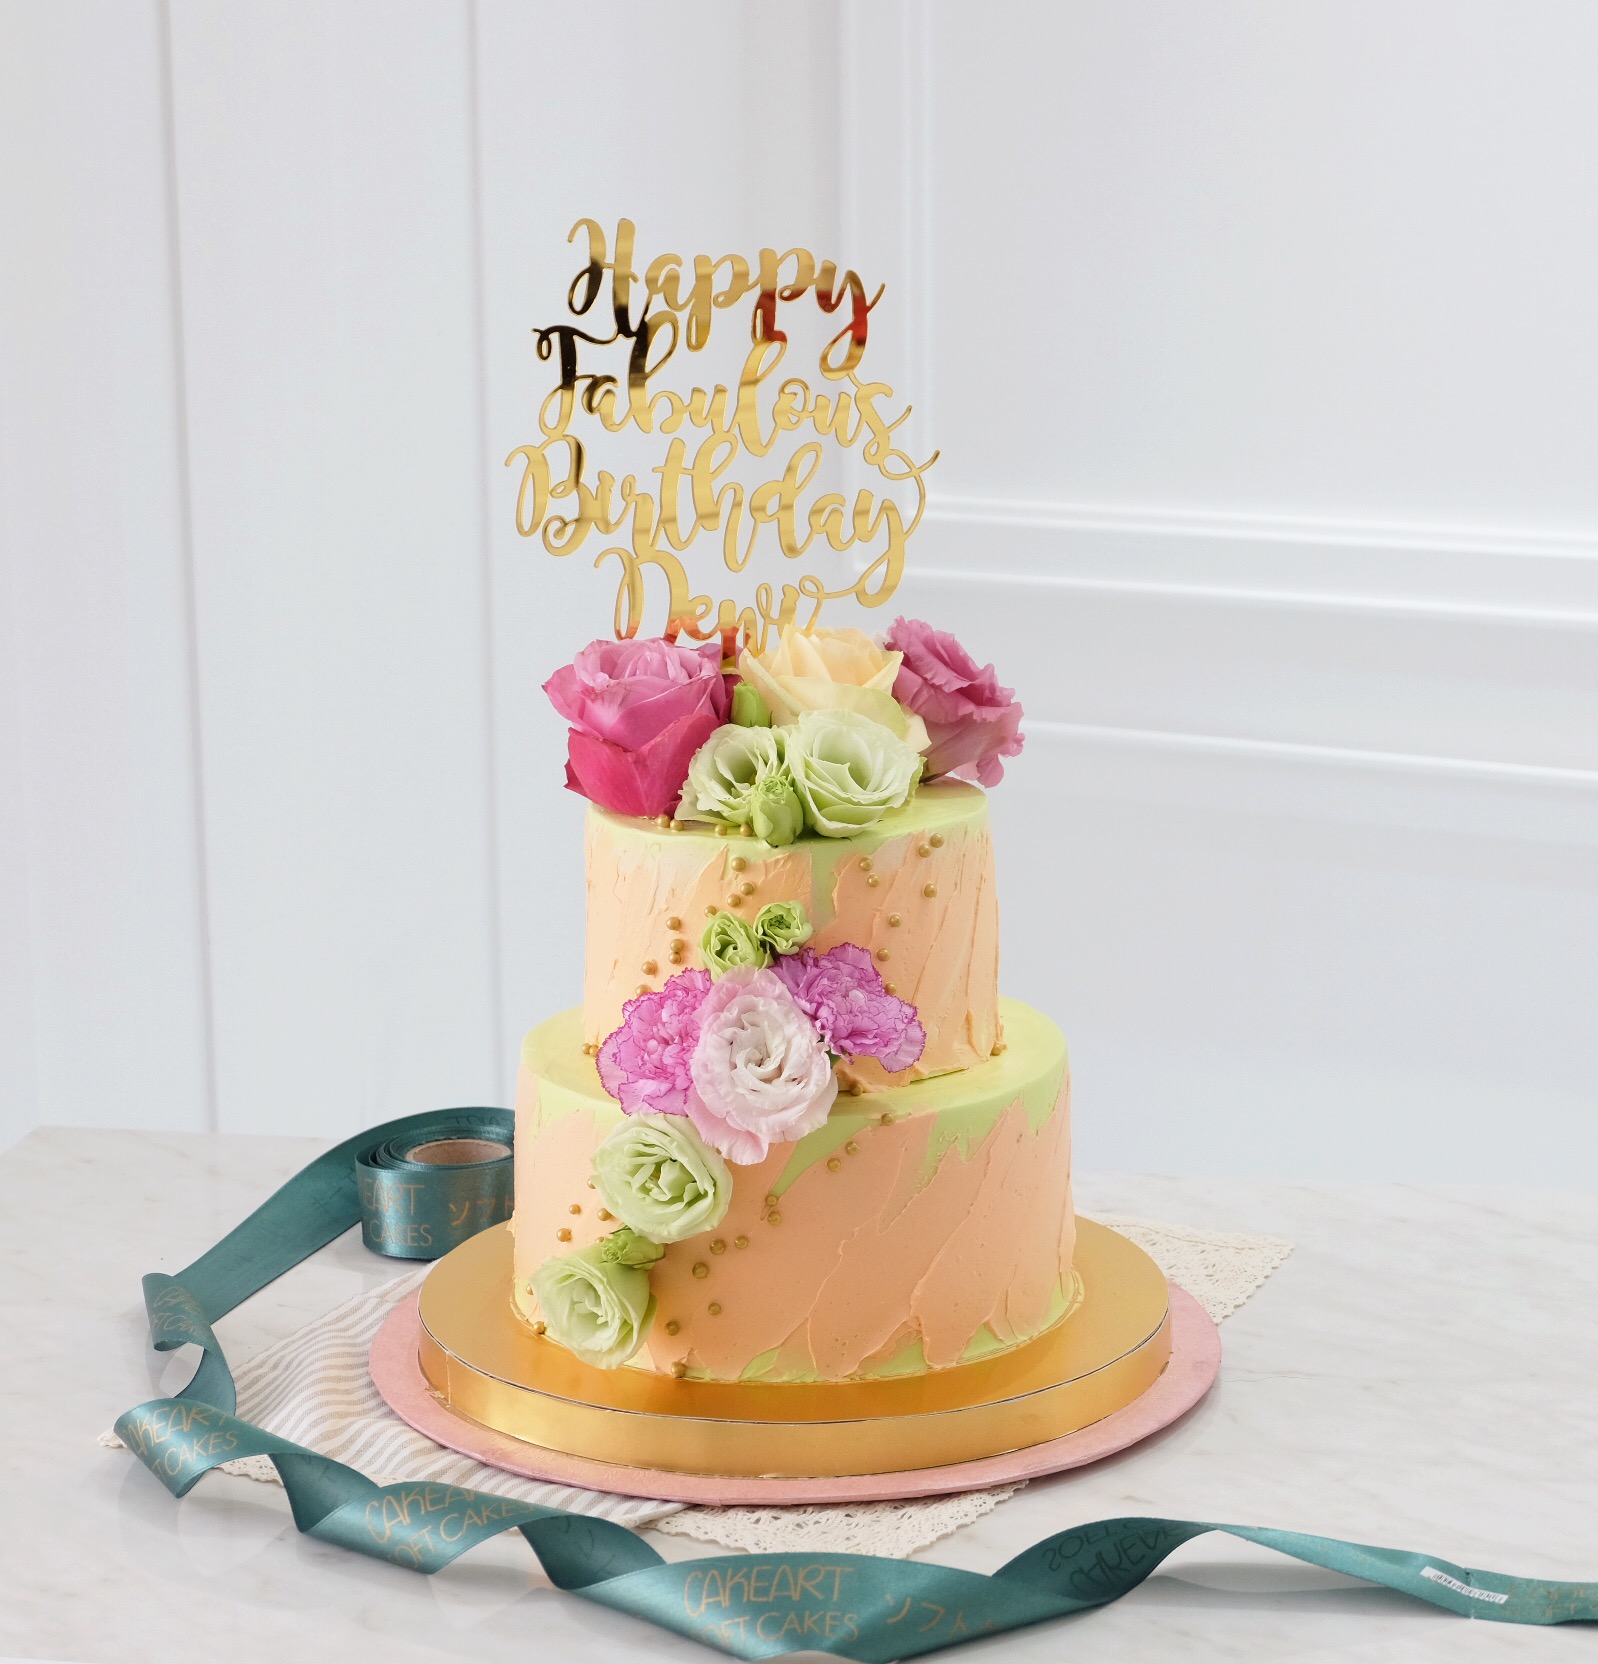 Two Tier Butterscotch Cake - Online flowers delivery to moradabad